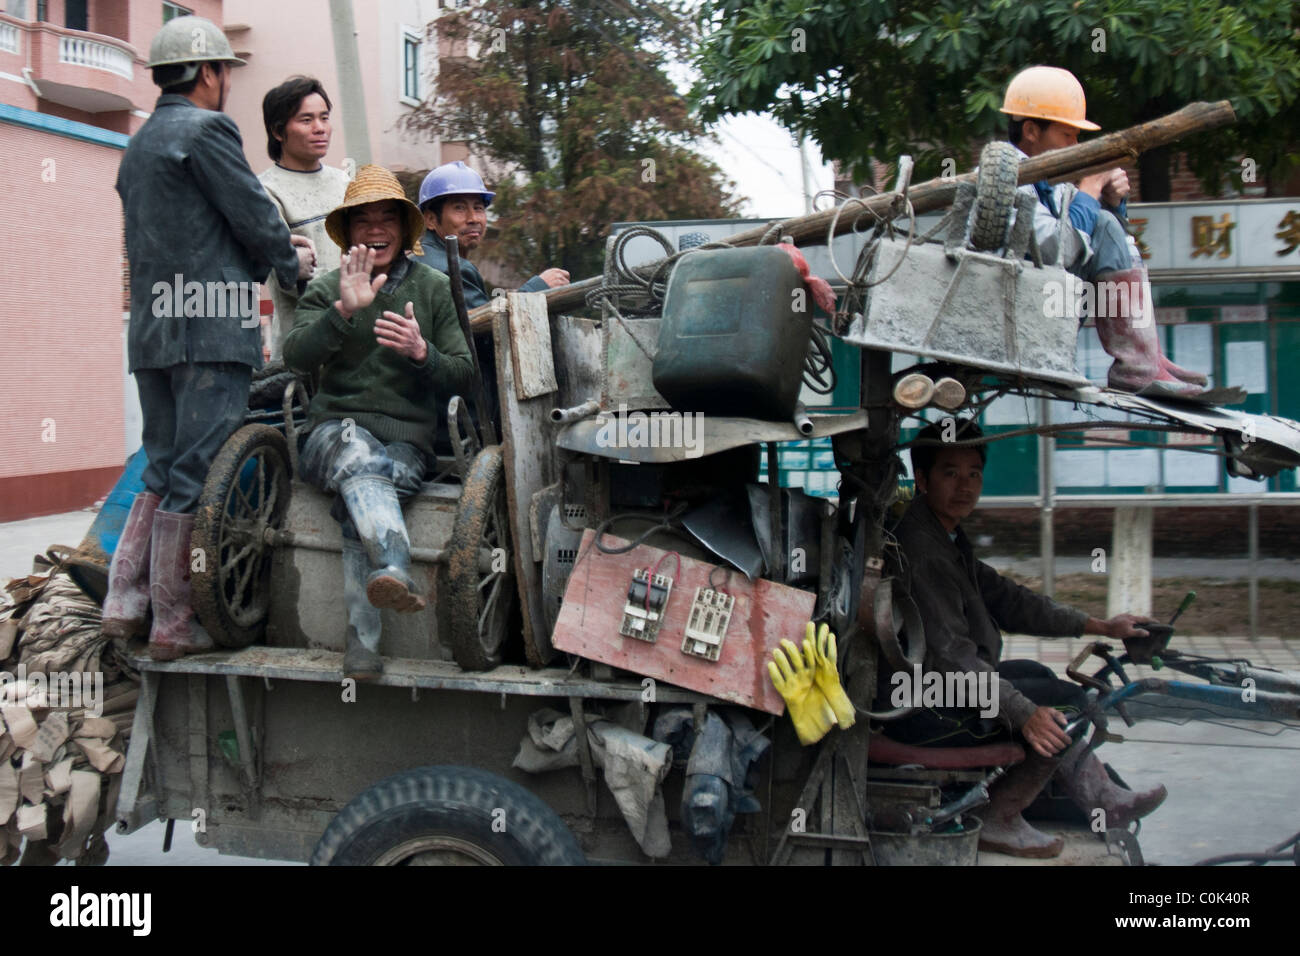 Chinese men/ peasants driving an extraordinary machine/ vehicle they obviously build themselves, Dongguan, China Stock Photo